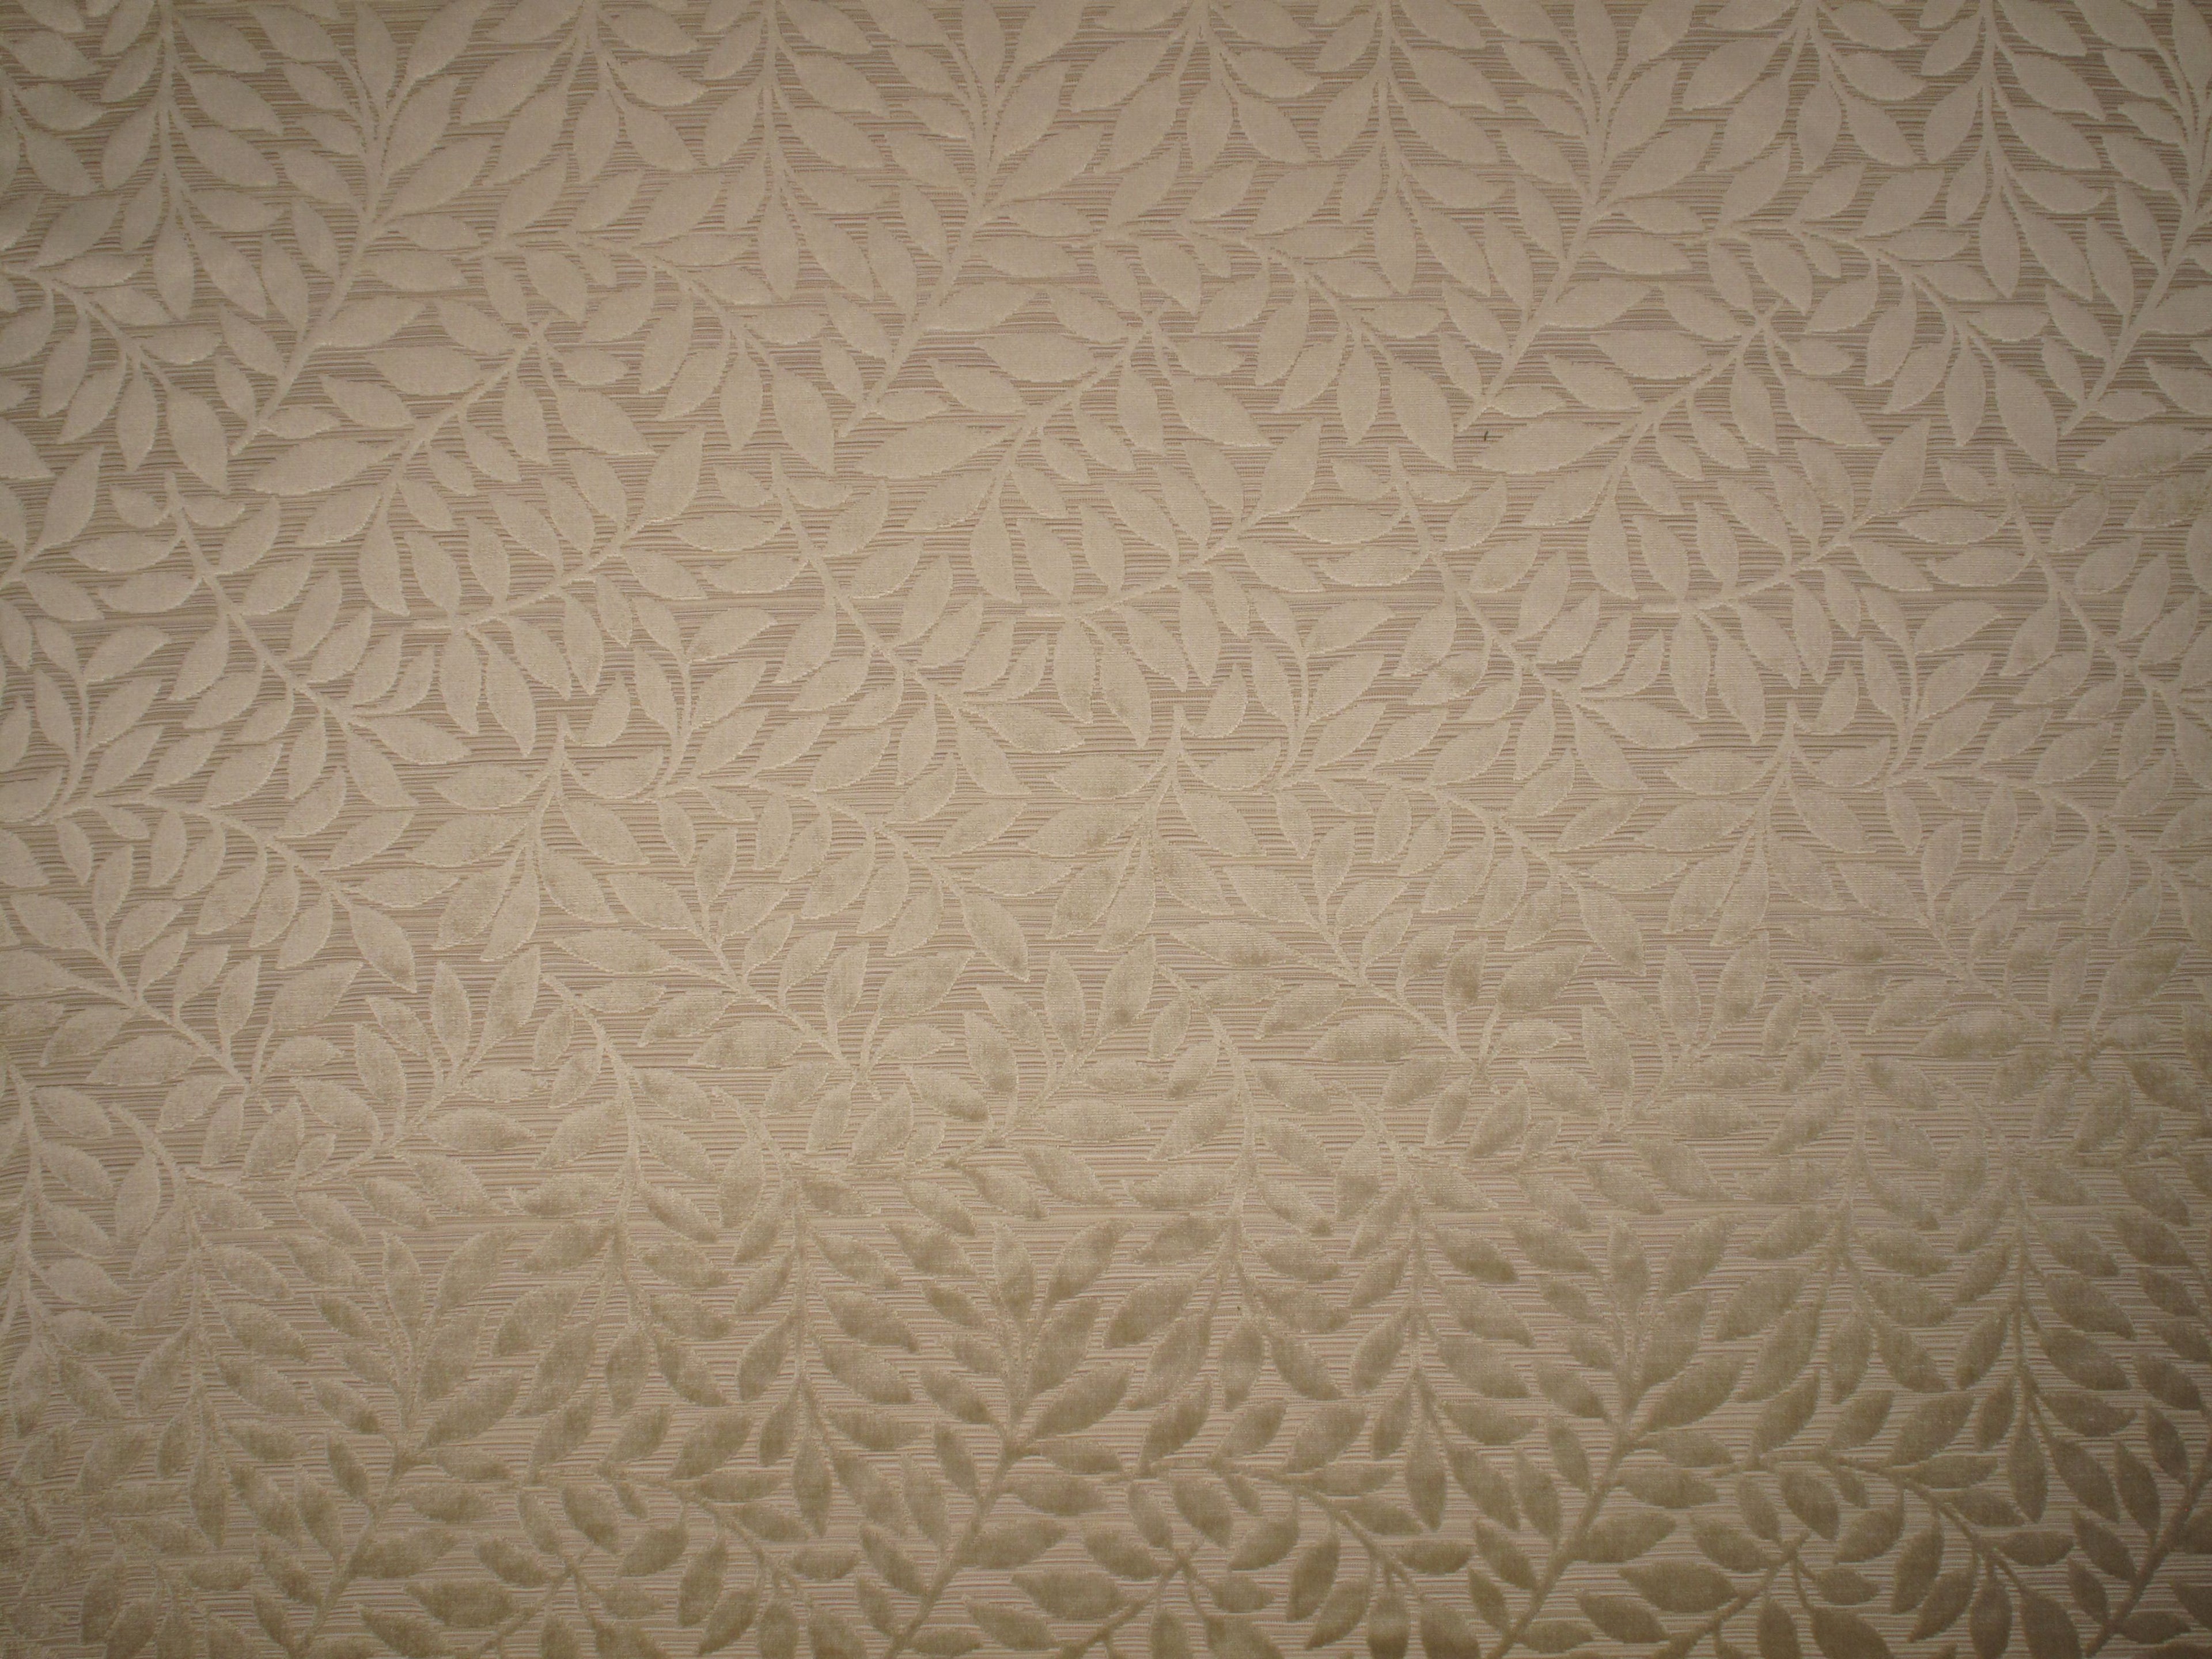 Argento fabric in natural color - pattern number AL 1902BHT0 - by Scalamandre in the Old World Weavers collection